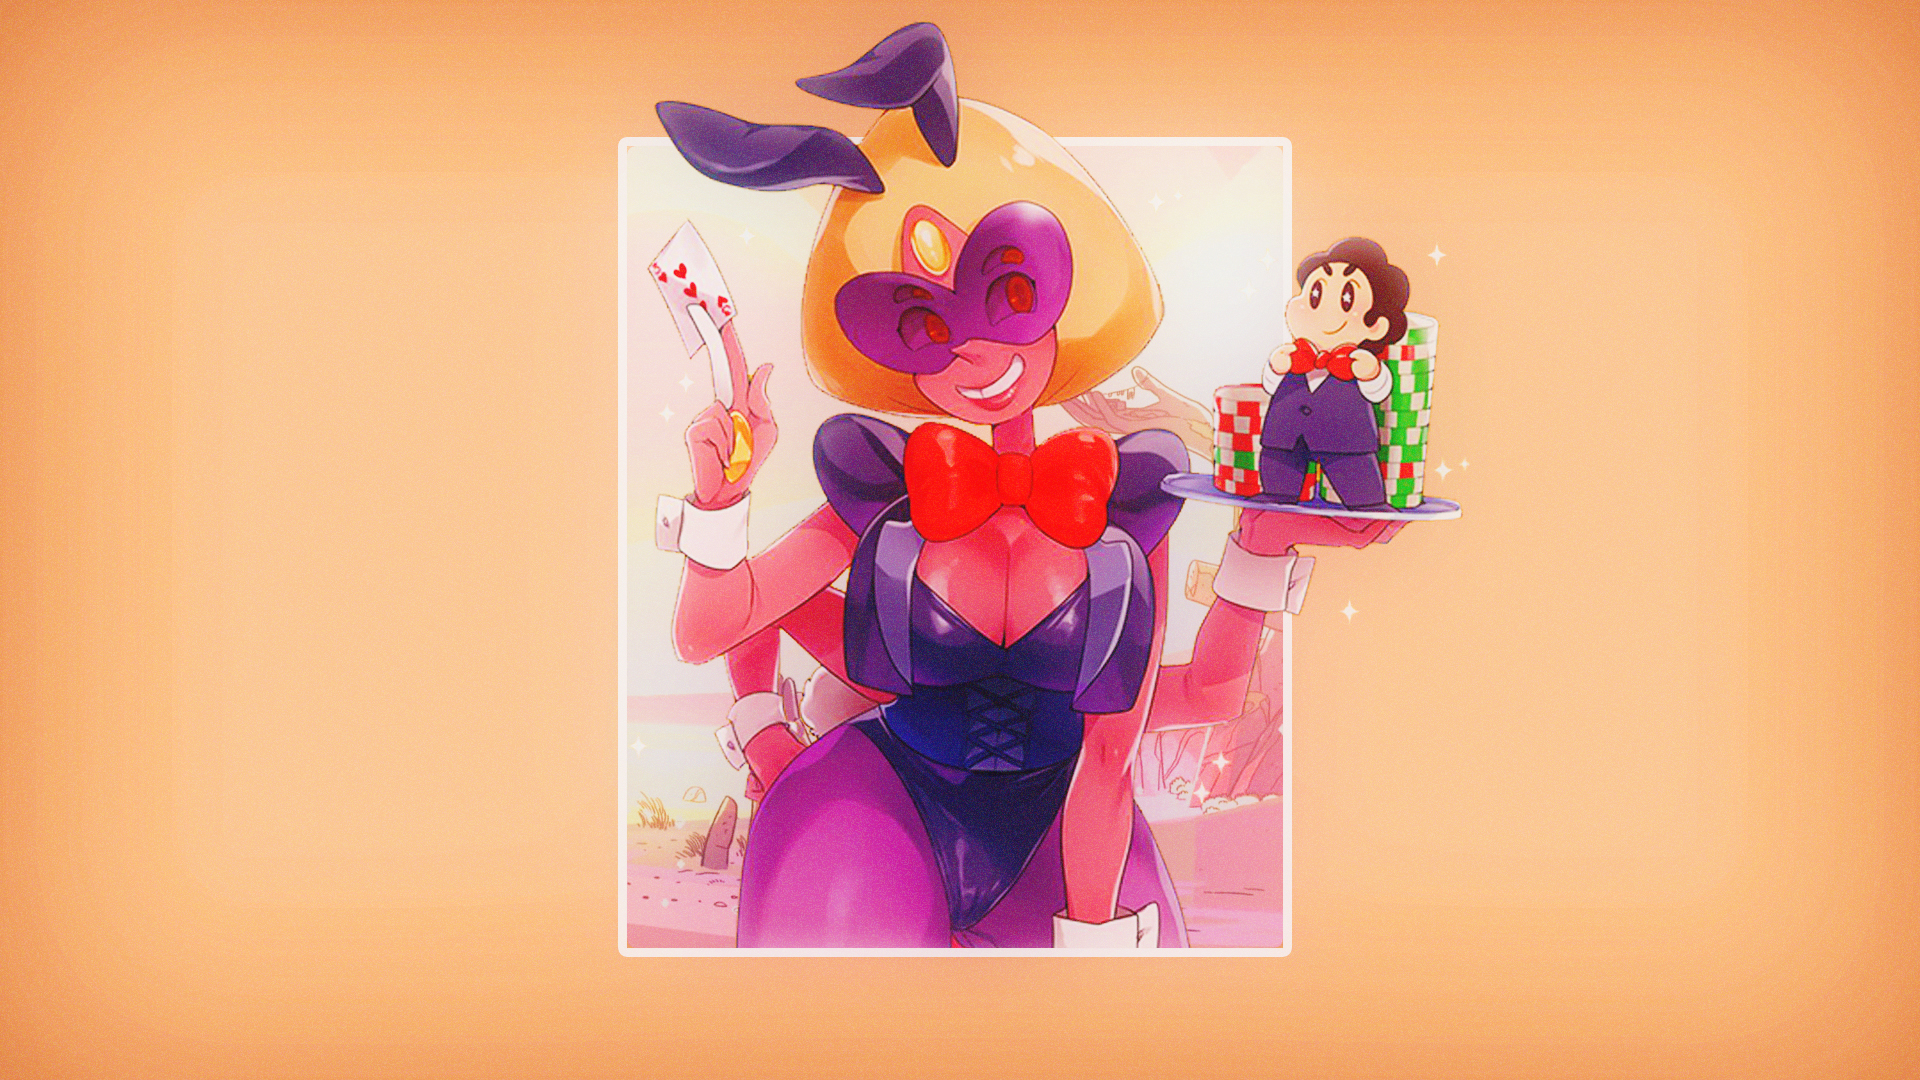 Anime 1920x1080 simple background picture-in-picture Steven Universe poker chips cards bunny suit bunny ears